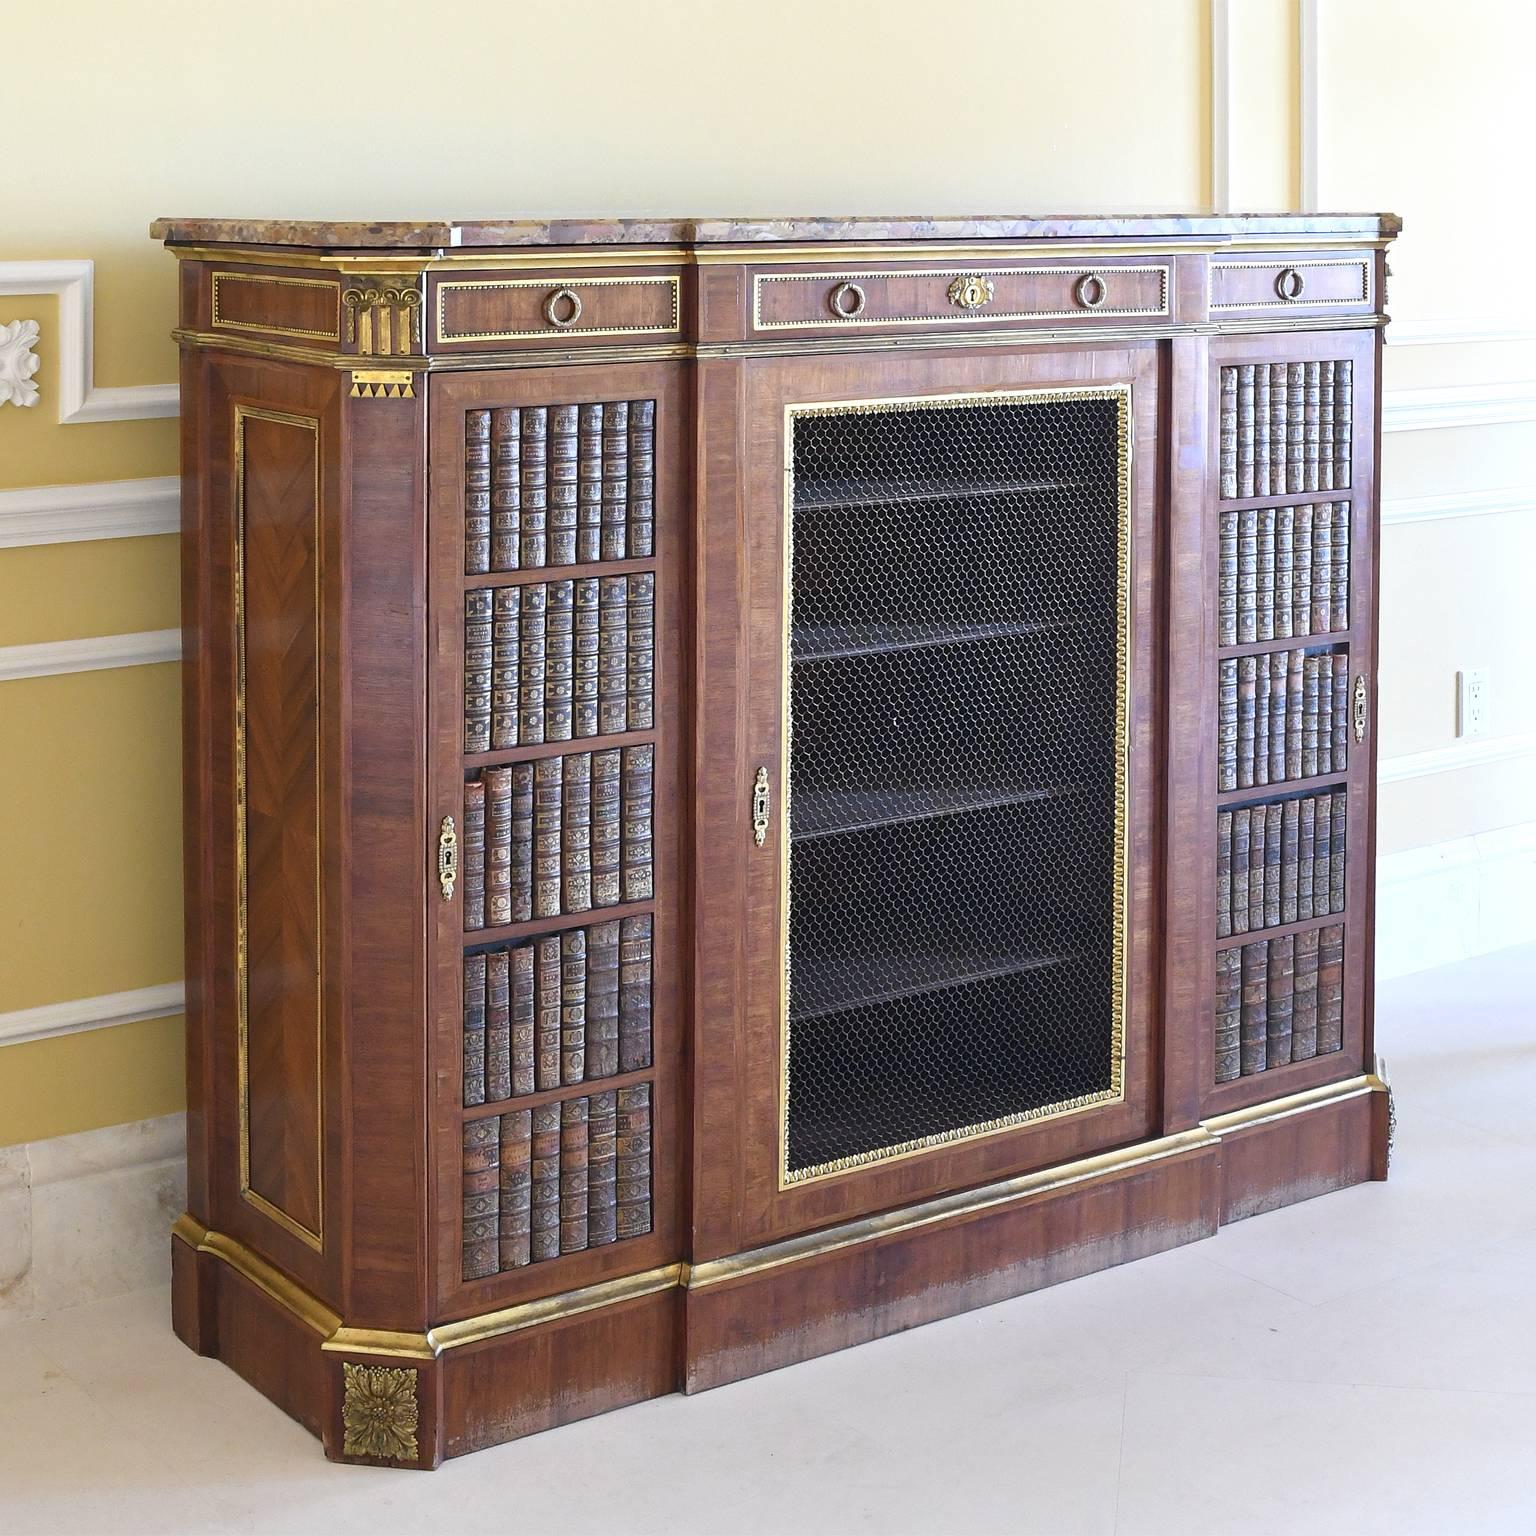 A very fine Napoleon III cabinet or bookcase in the Louis XVI style with original marble top, bronze doré ormolu, antique 18th century French book bindings on the end doors and a brass wire on the center door (that has interior hardware for a